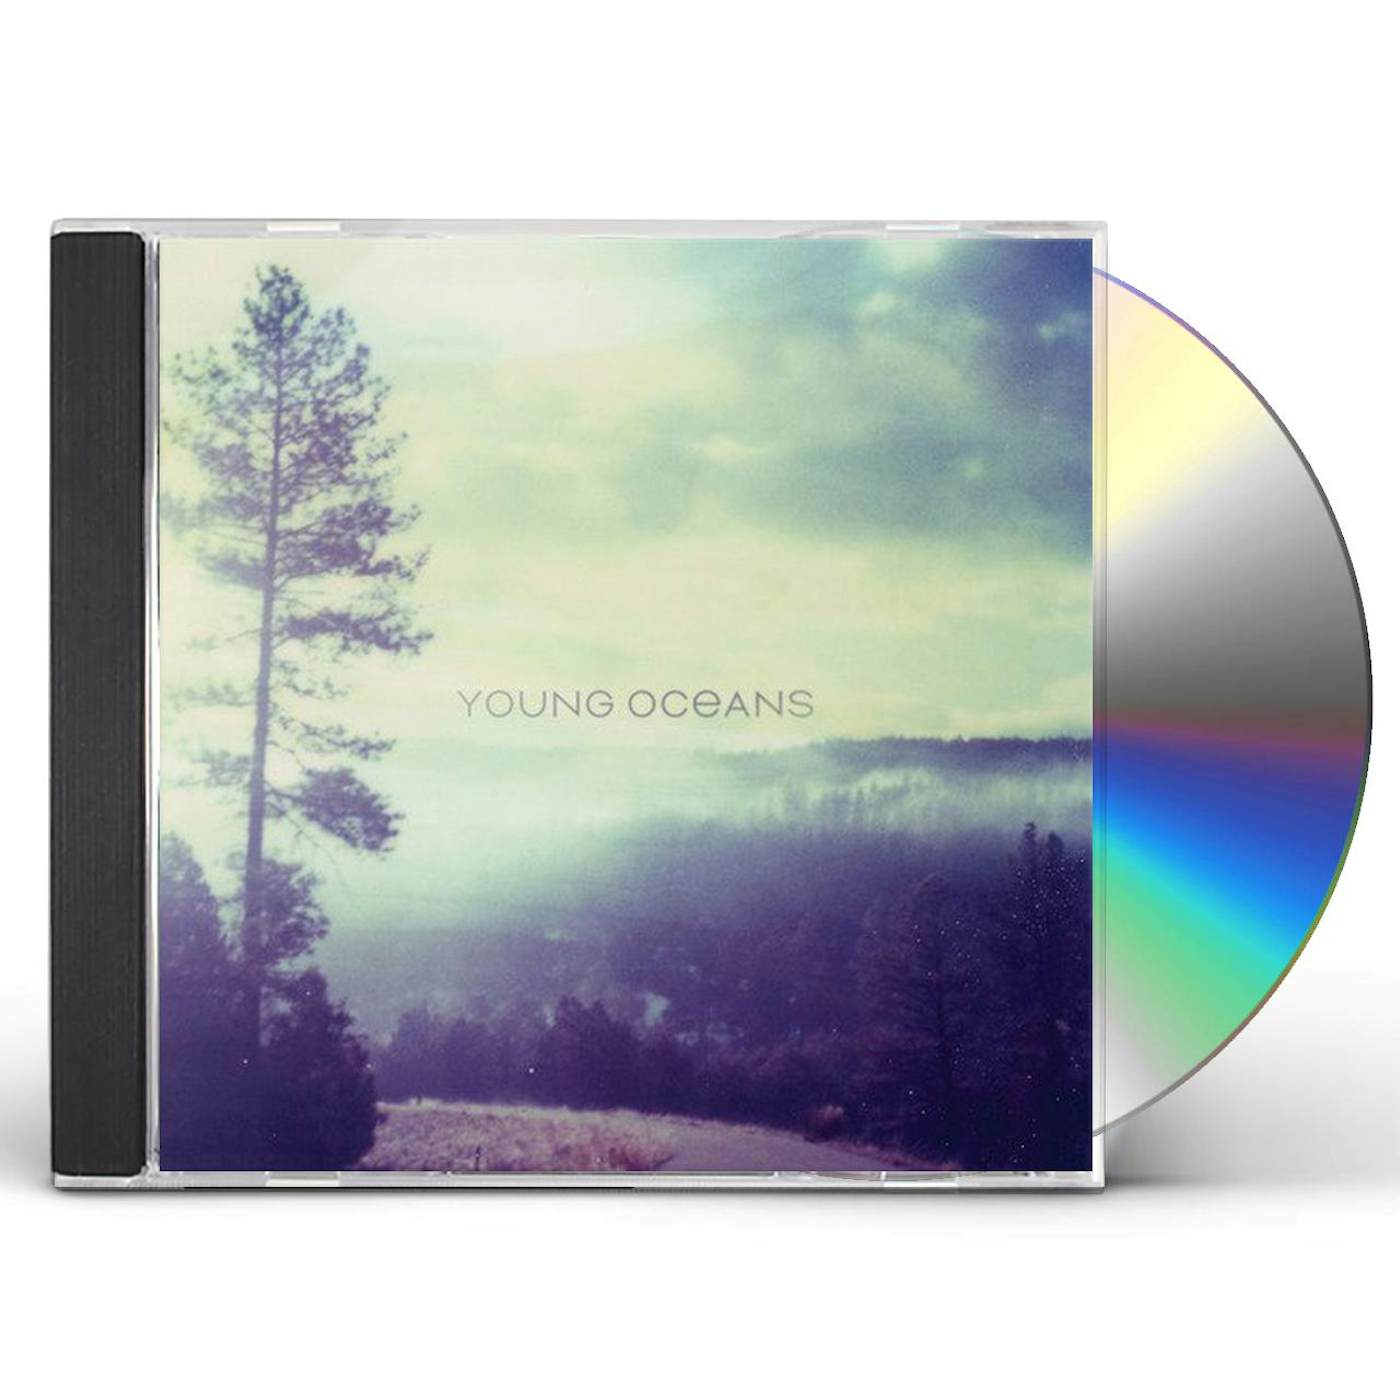 YOUNG OCEANS CD